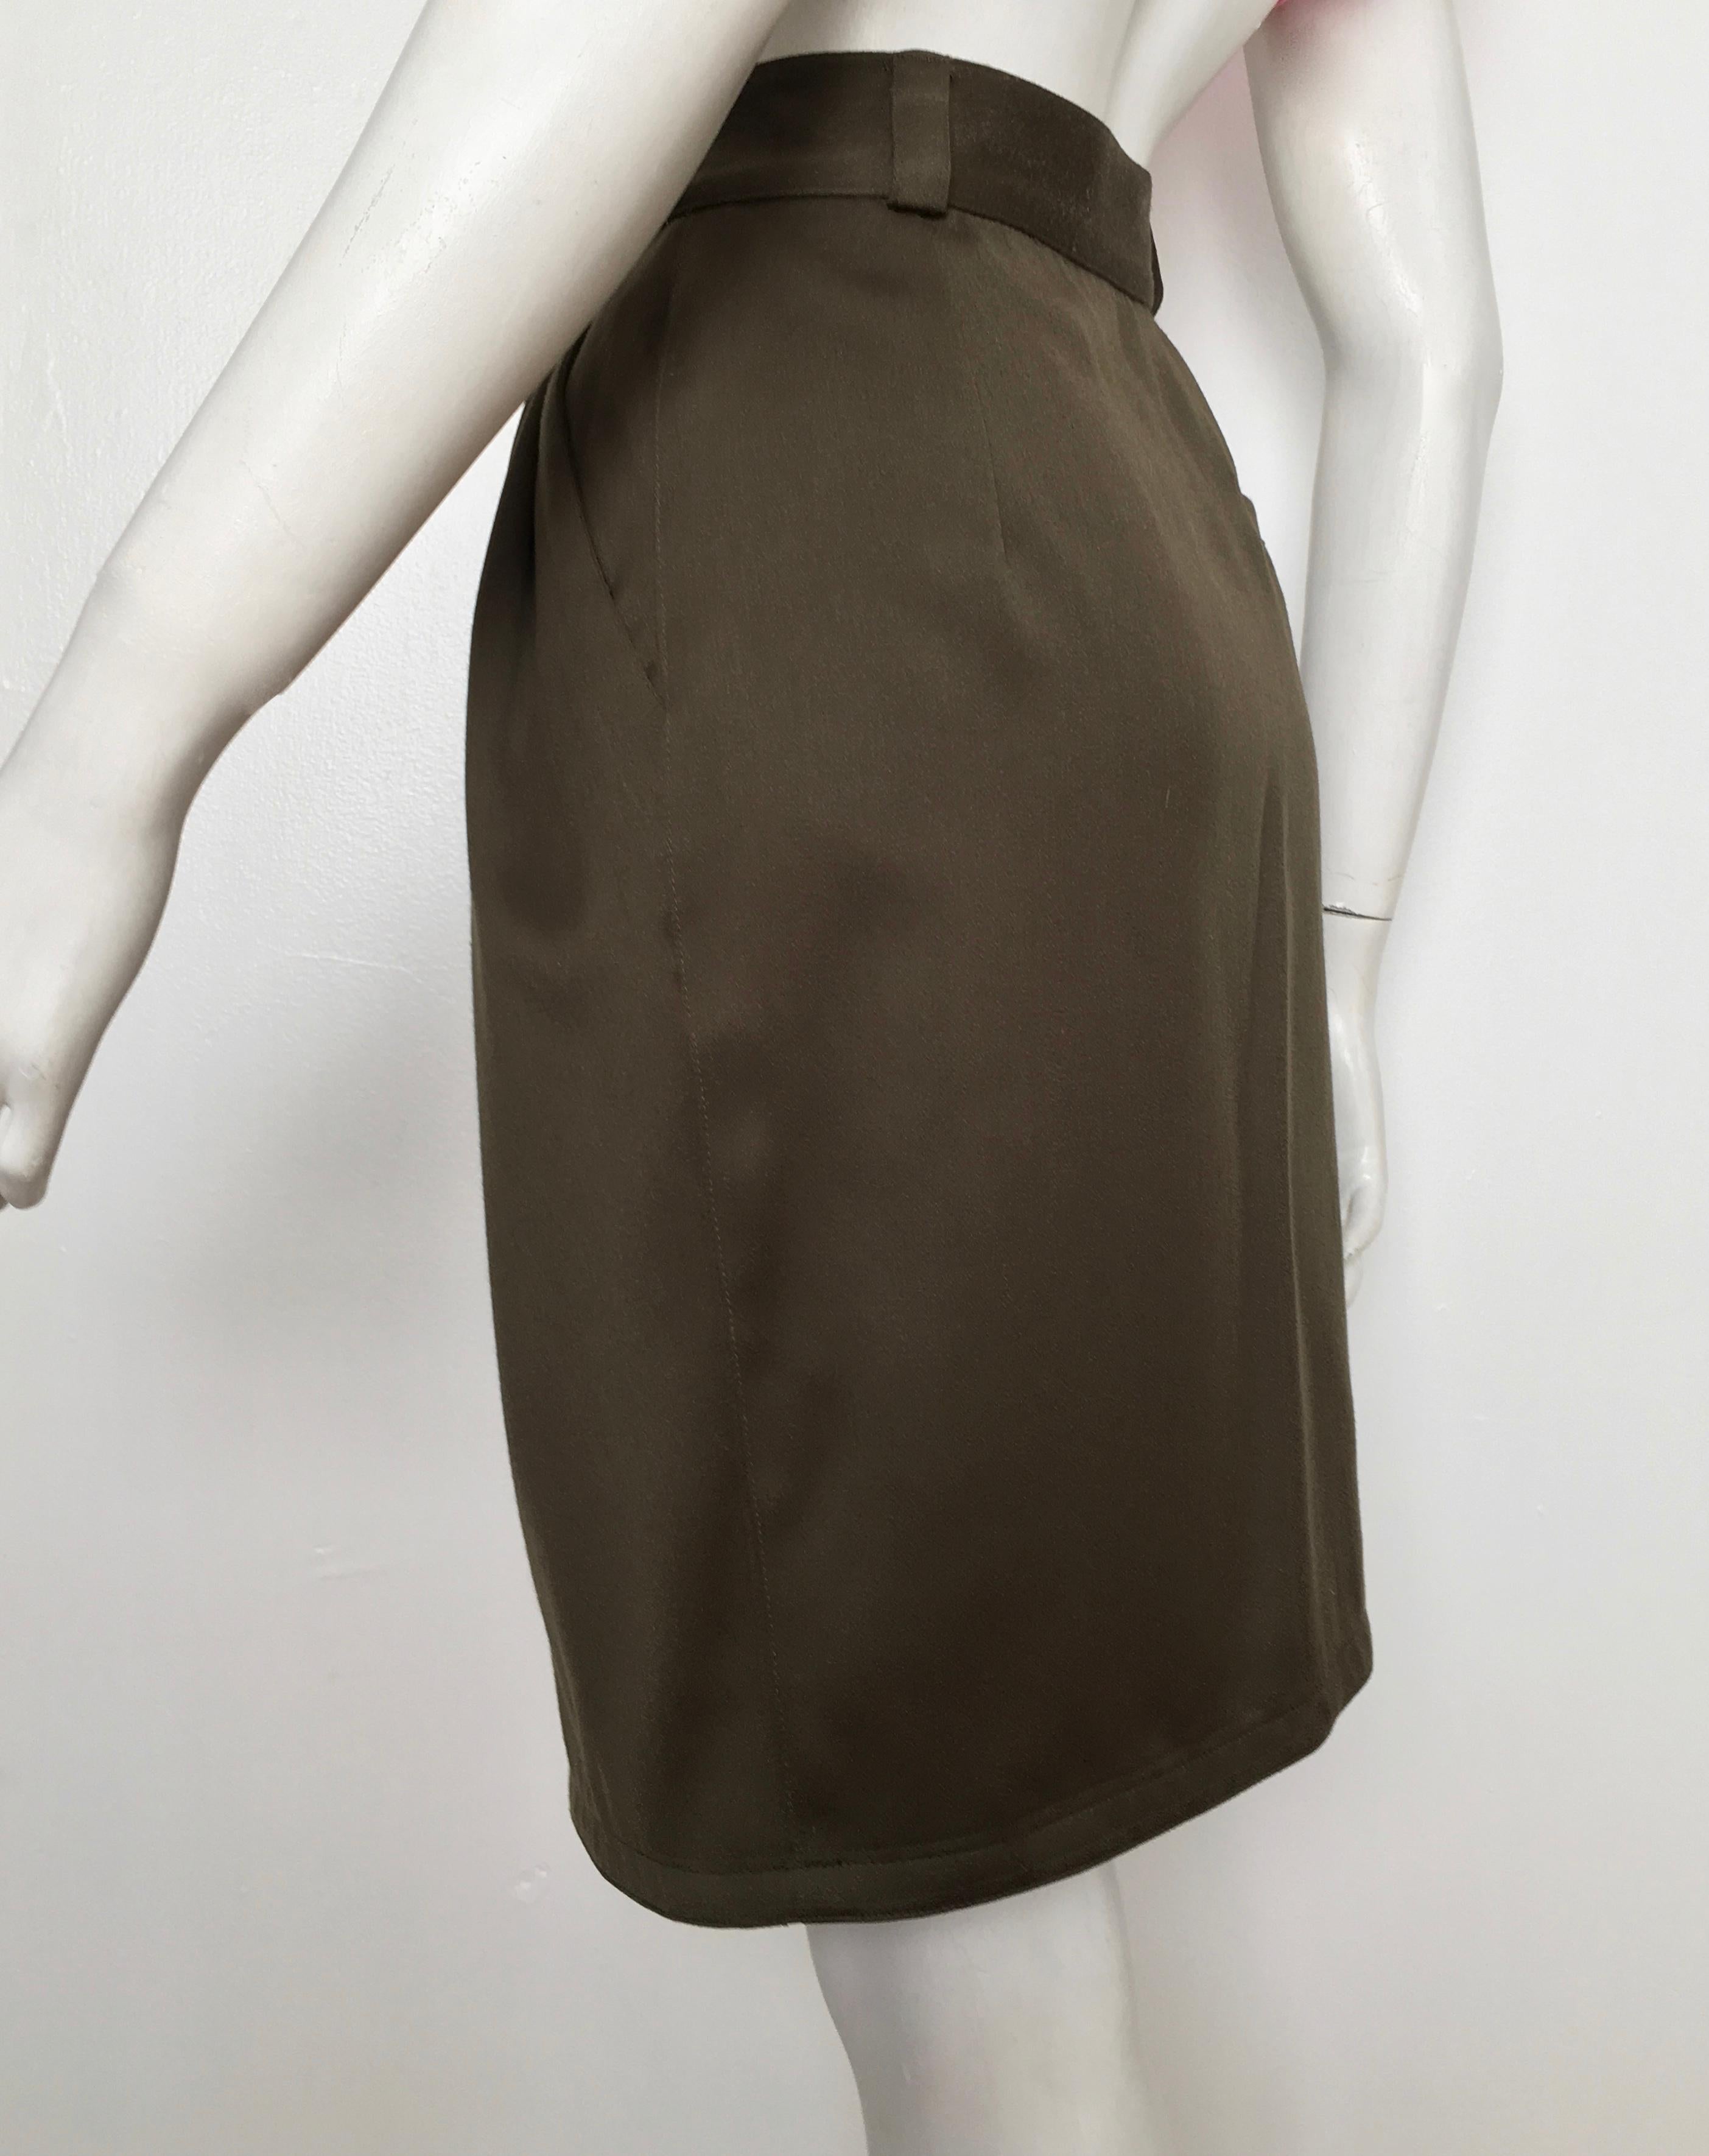 Gianni Versace 1980s Olive Wool Skirt with Pockets Size 6. In Excellent Condition For Sale In Atlanta, GA